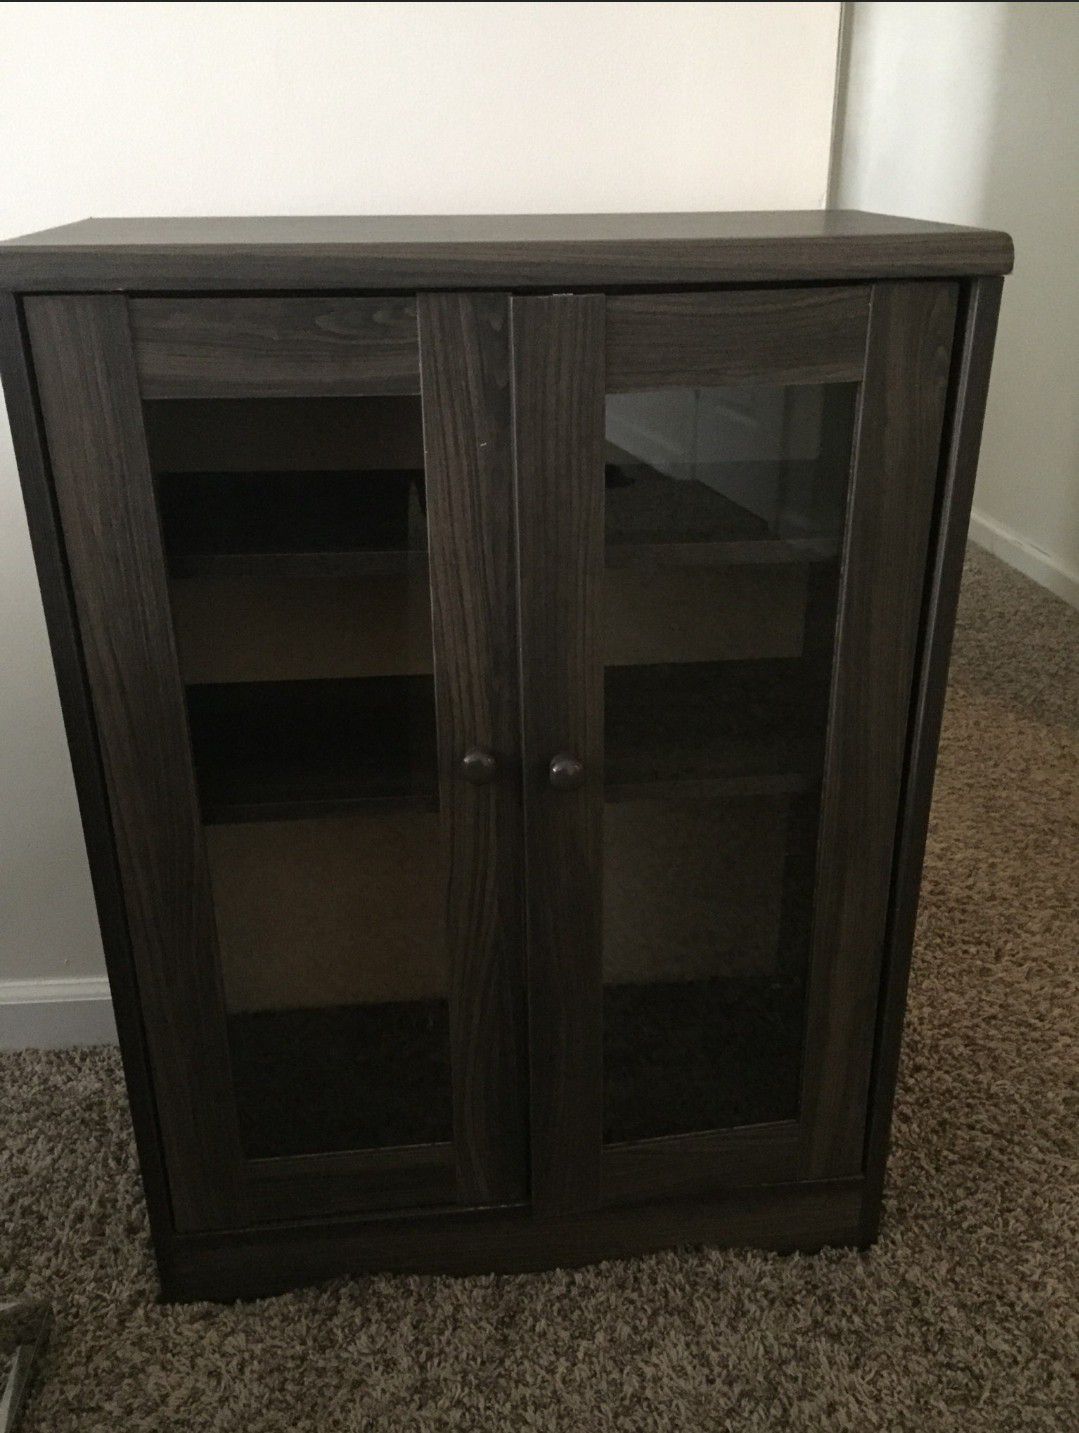 NEW Affordable Tv Stand with Matching Storage Cabinet